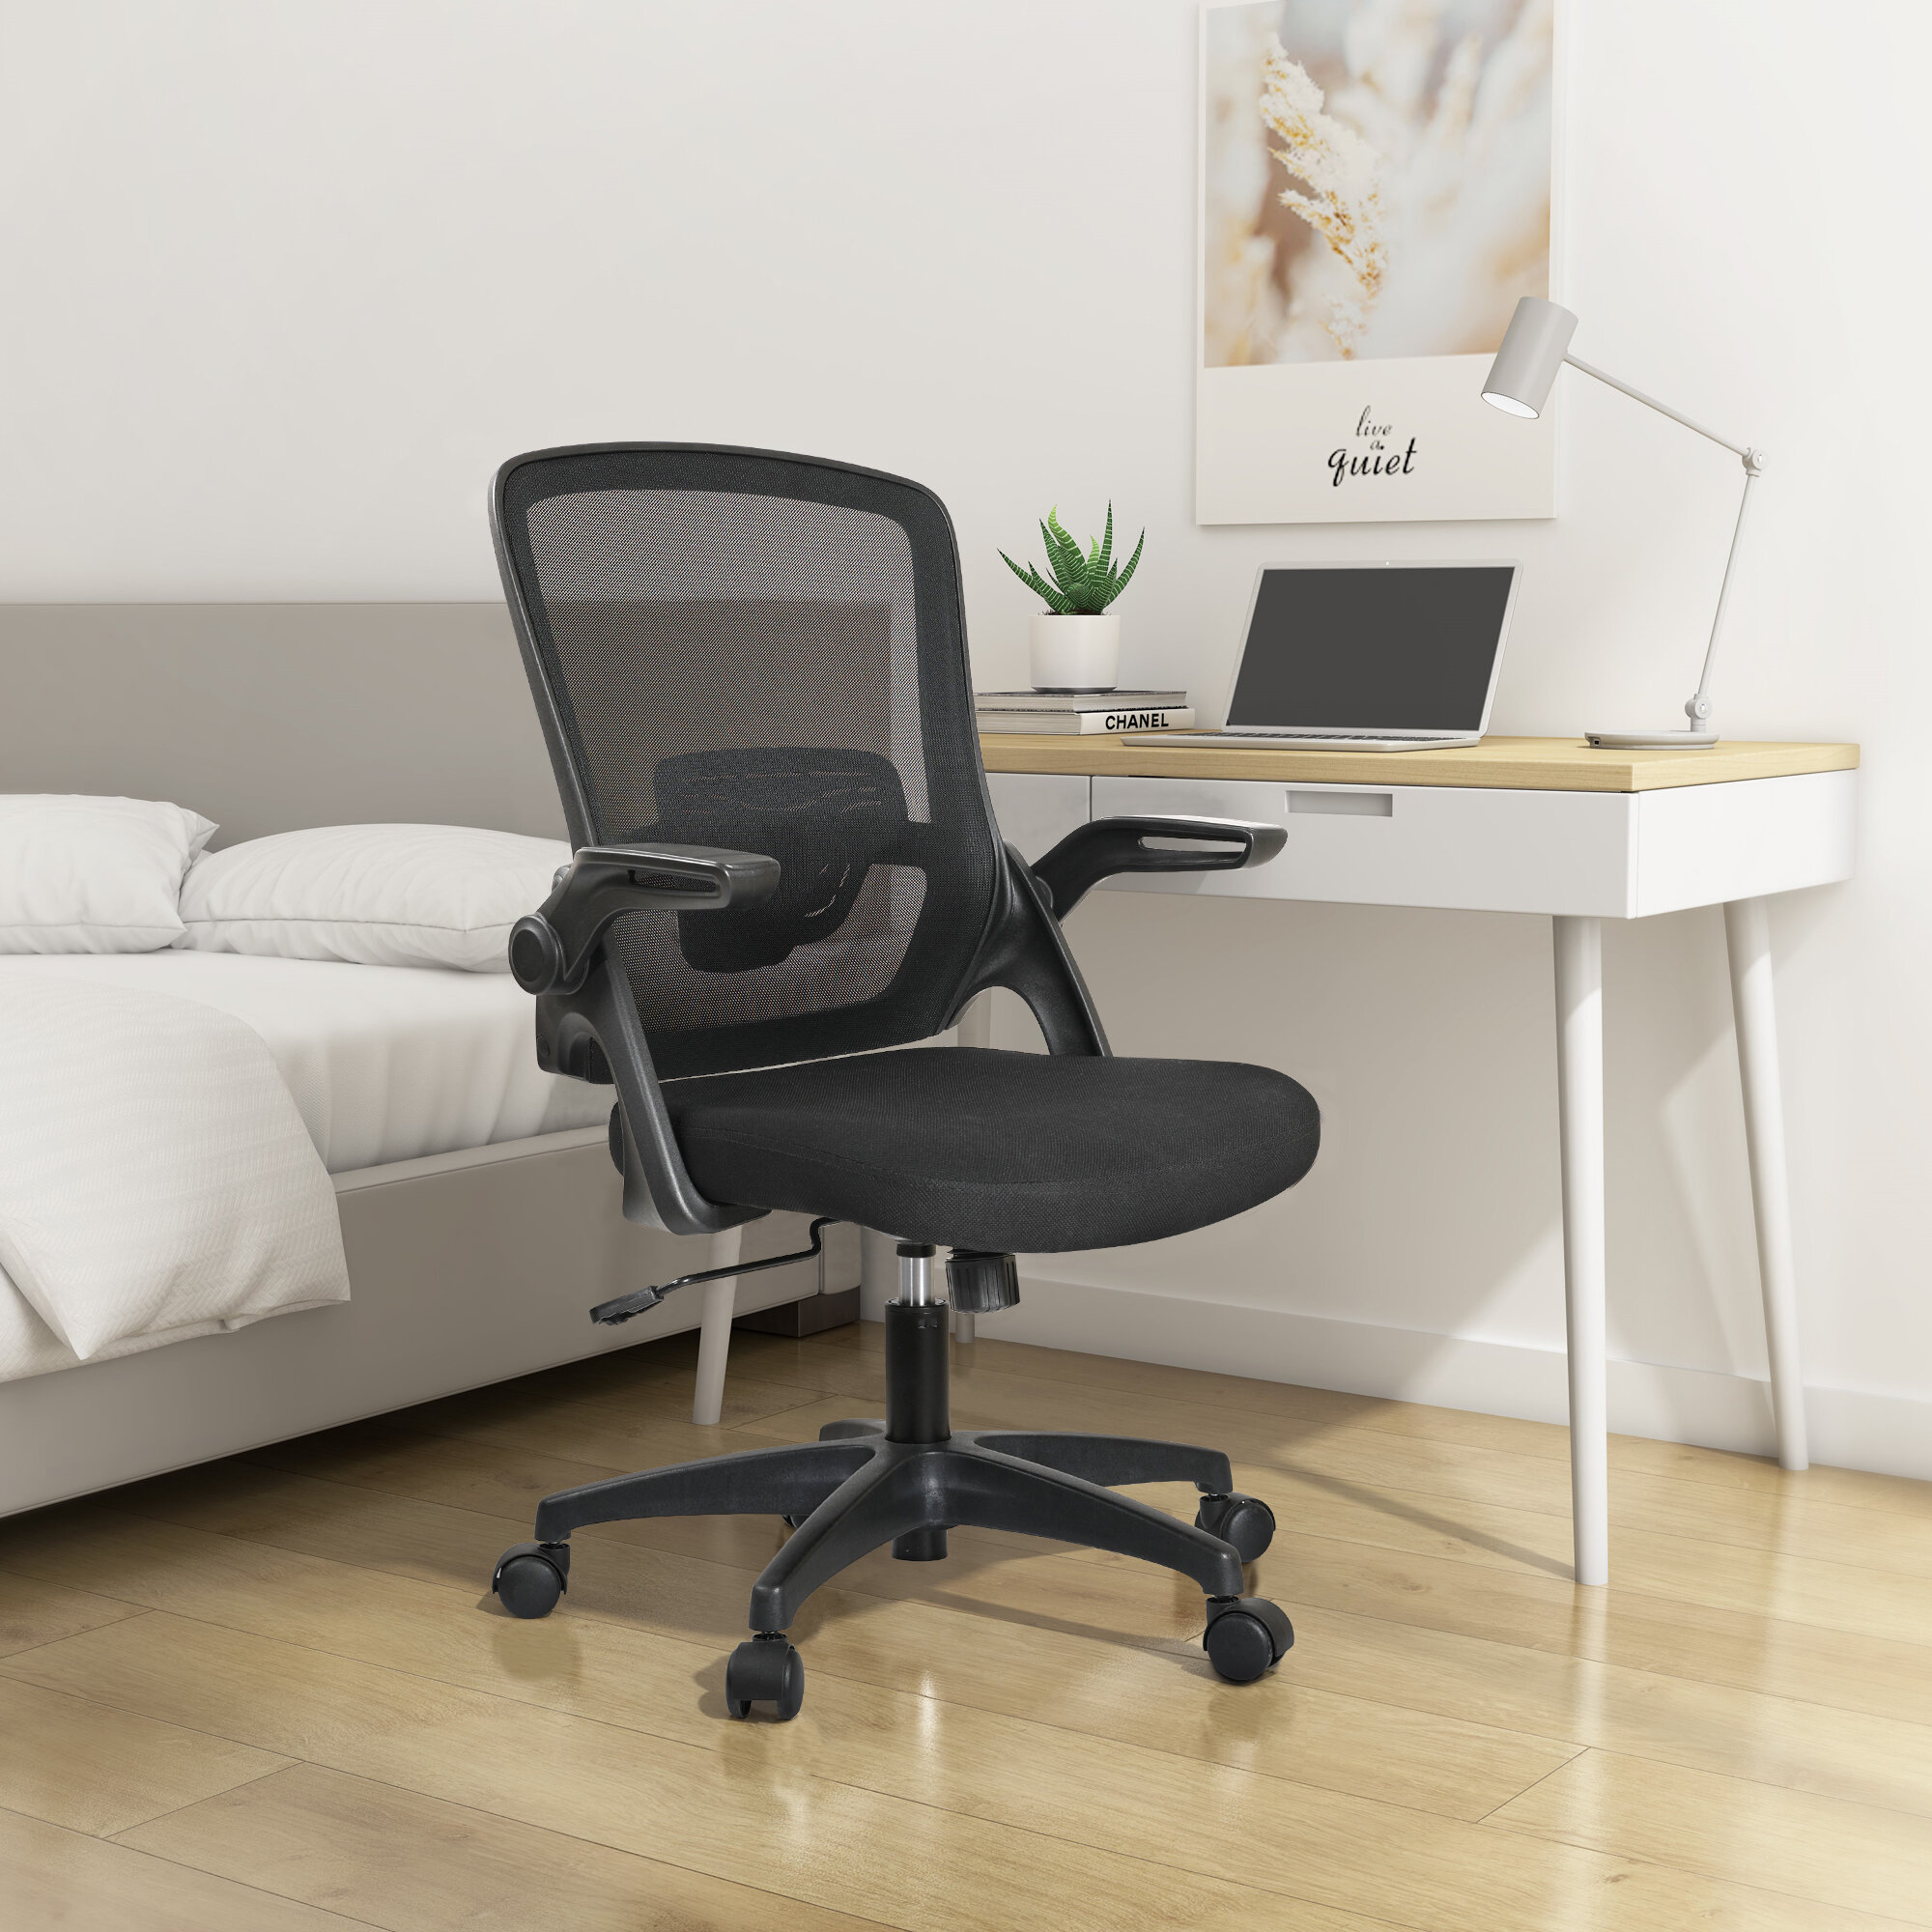 Details about   Ergonomic Mesh Office Chair Adjustable Desk Chair Swivel Computer Chairs white 